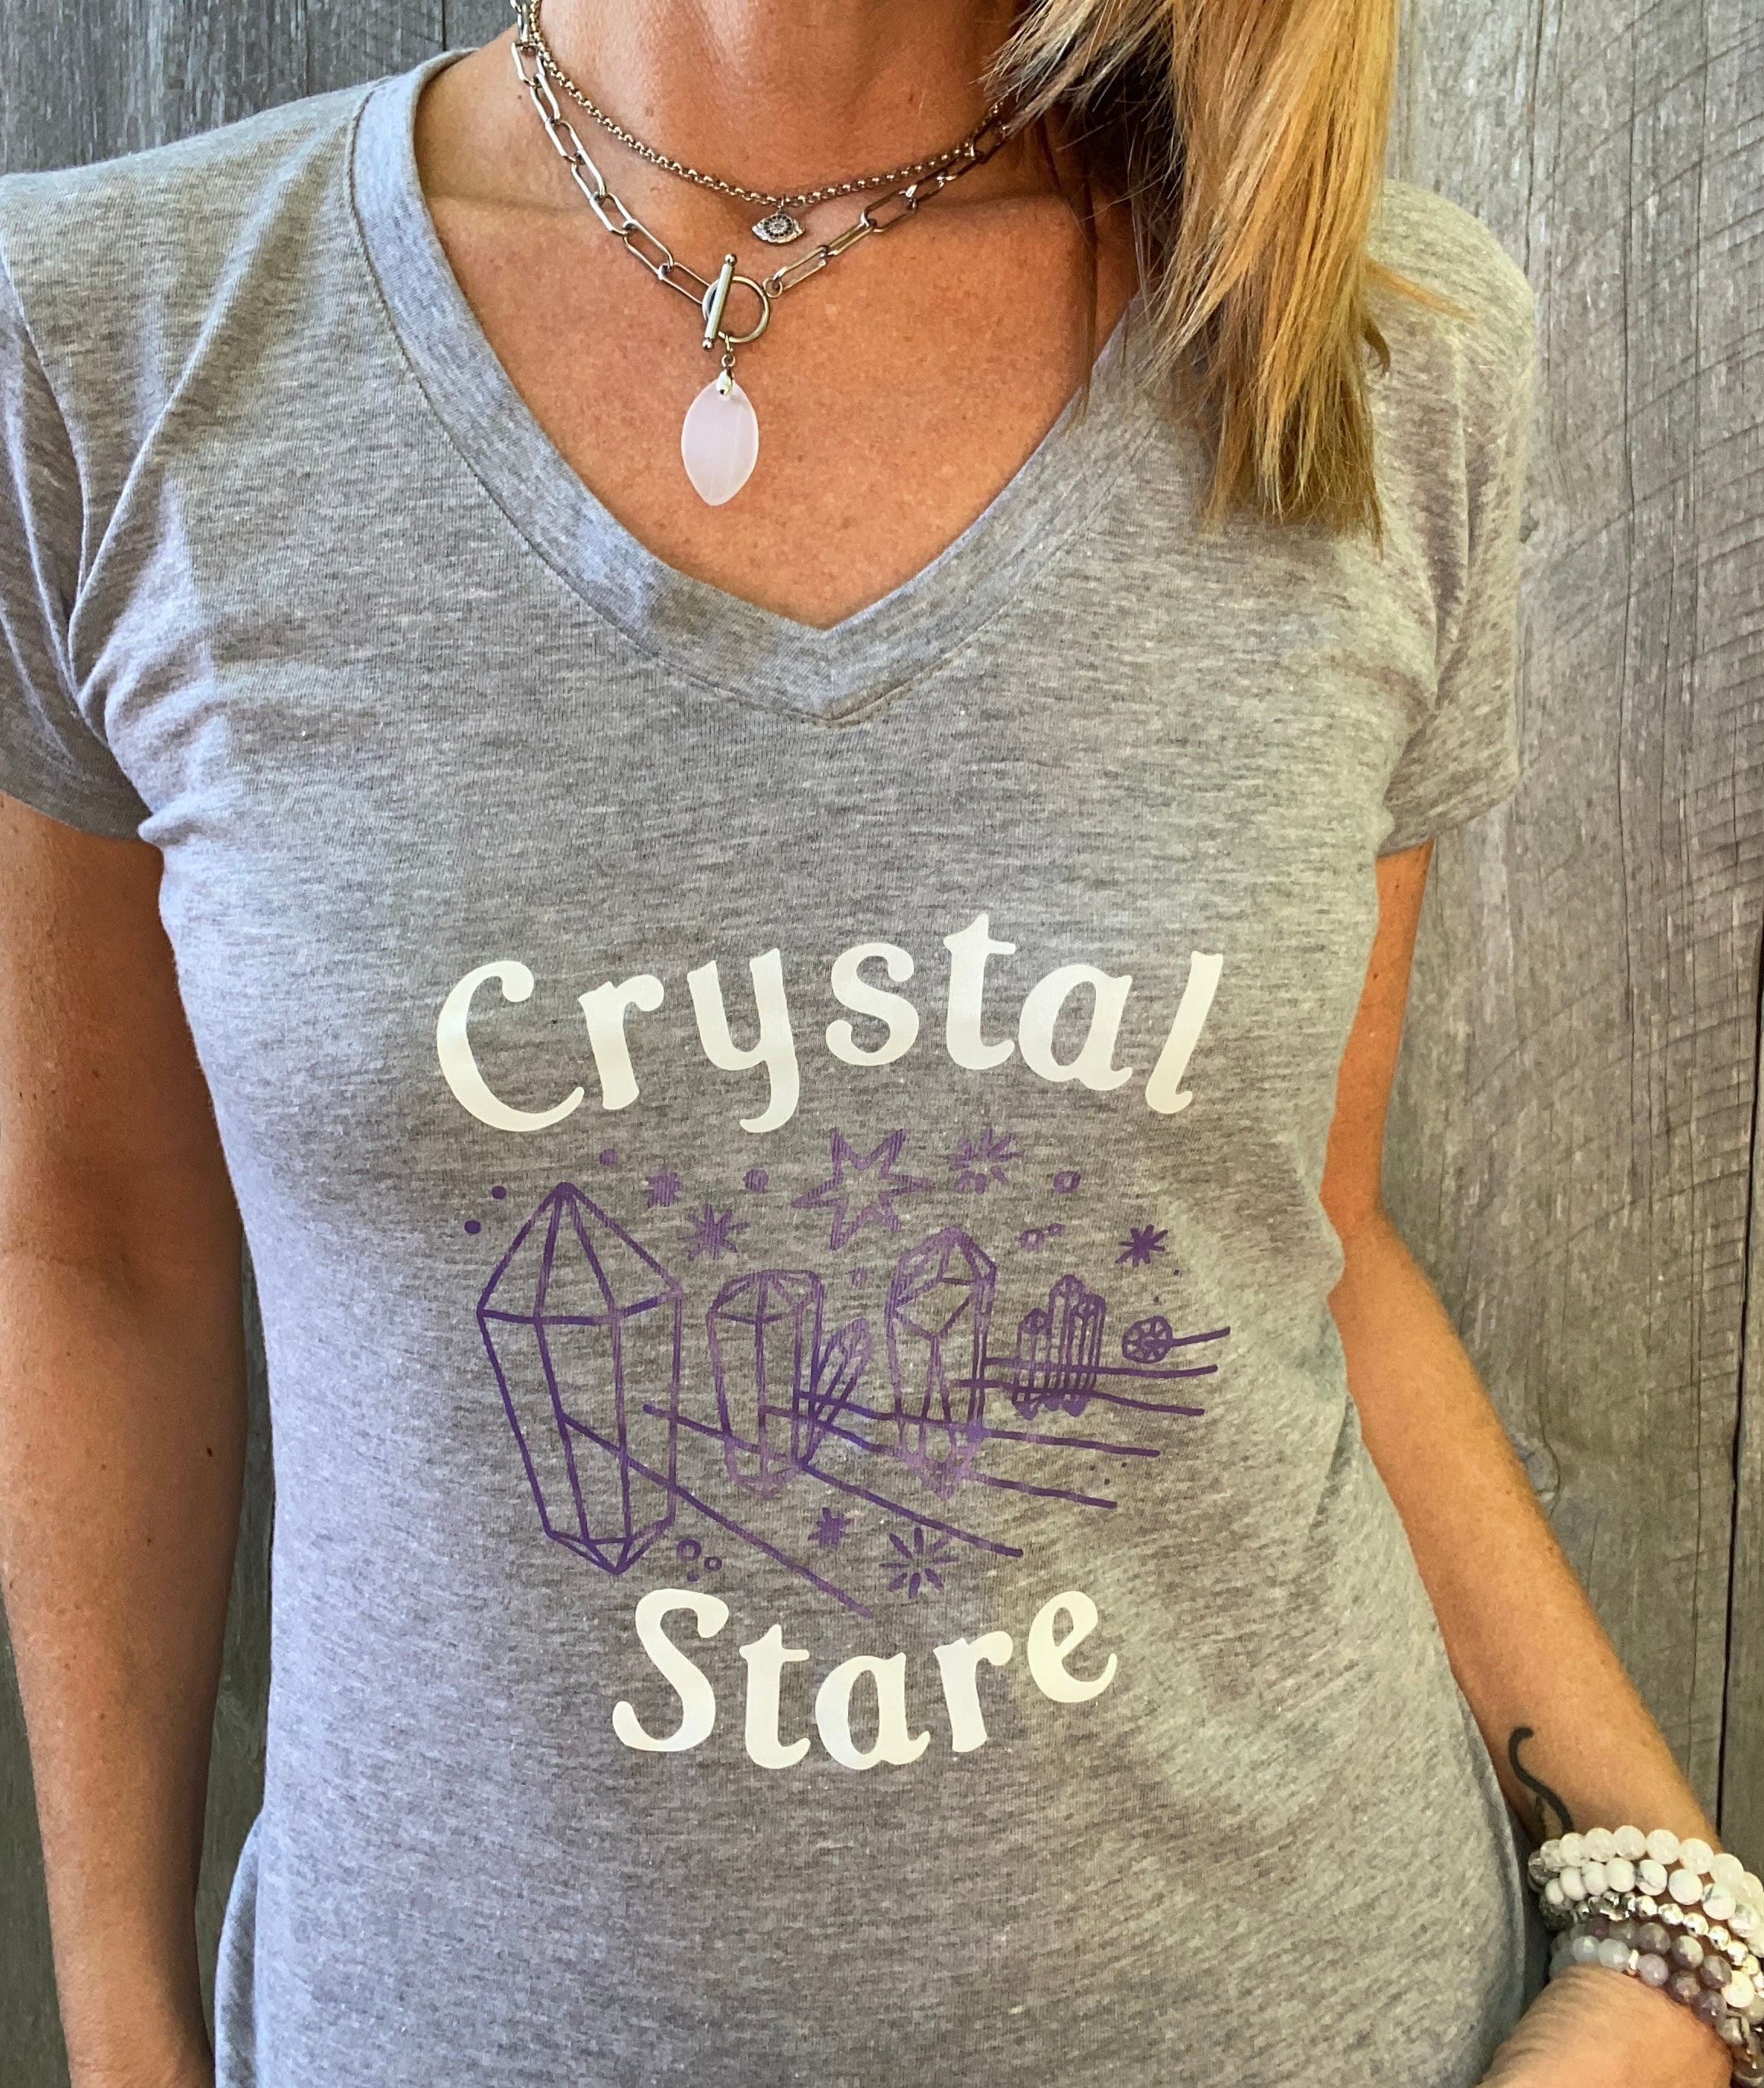 Crystal Stare T-Shirt